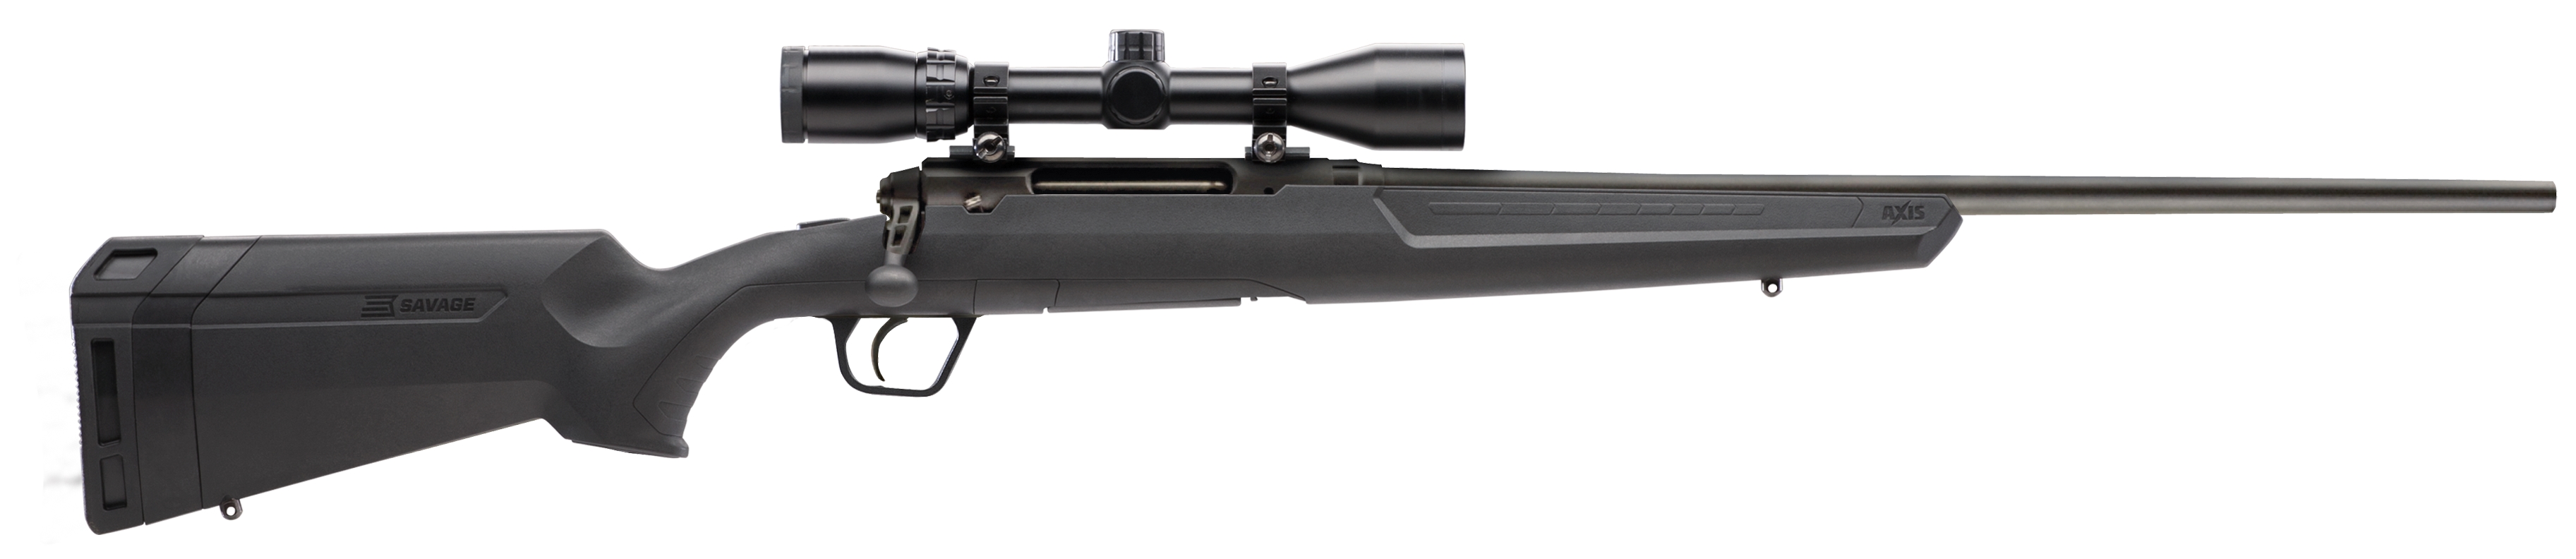 Savage Arms Axis XP 223 Rem